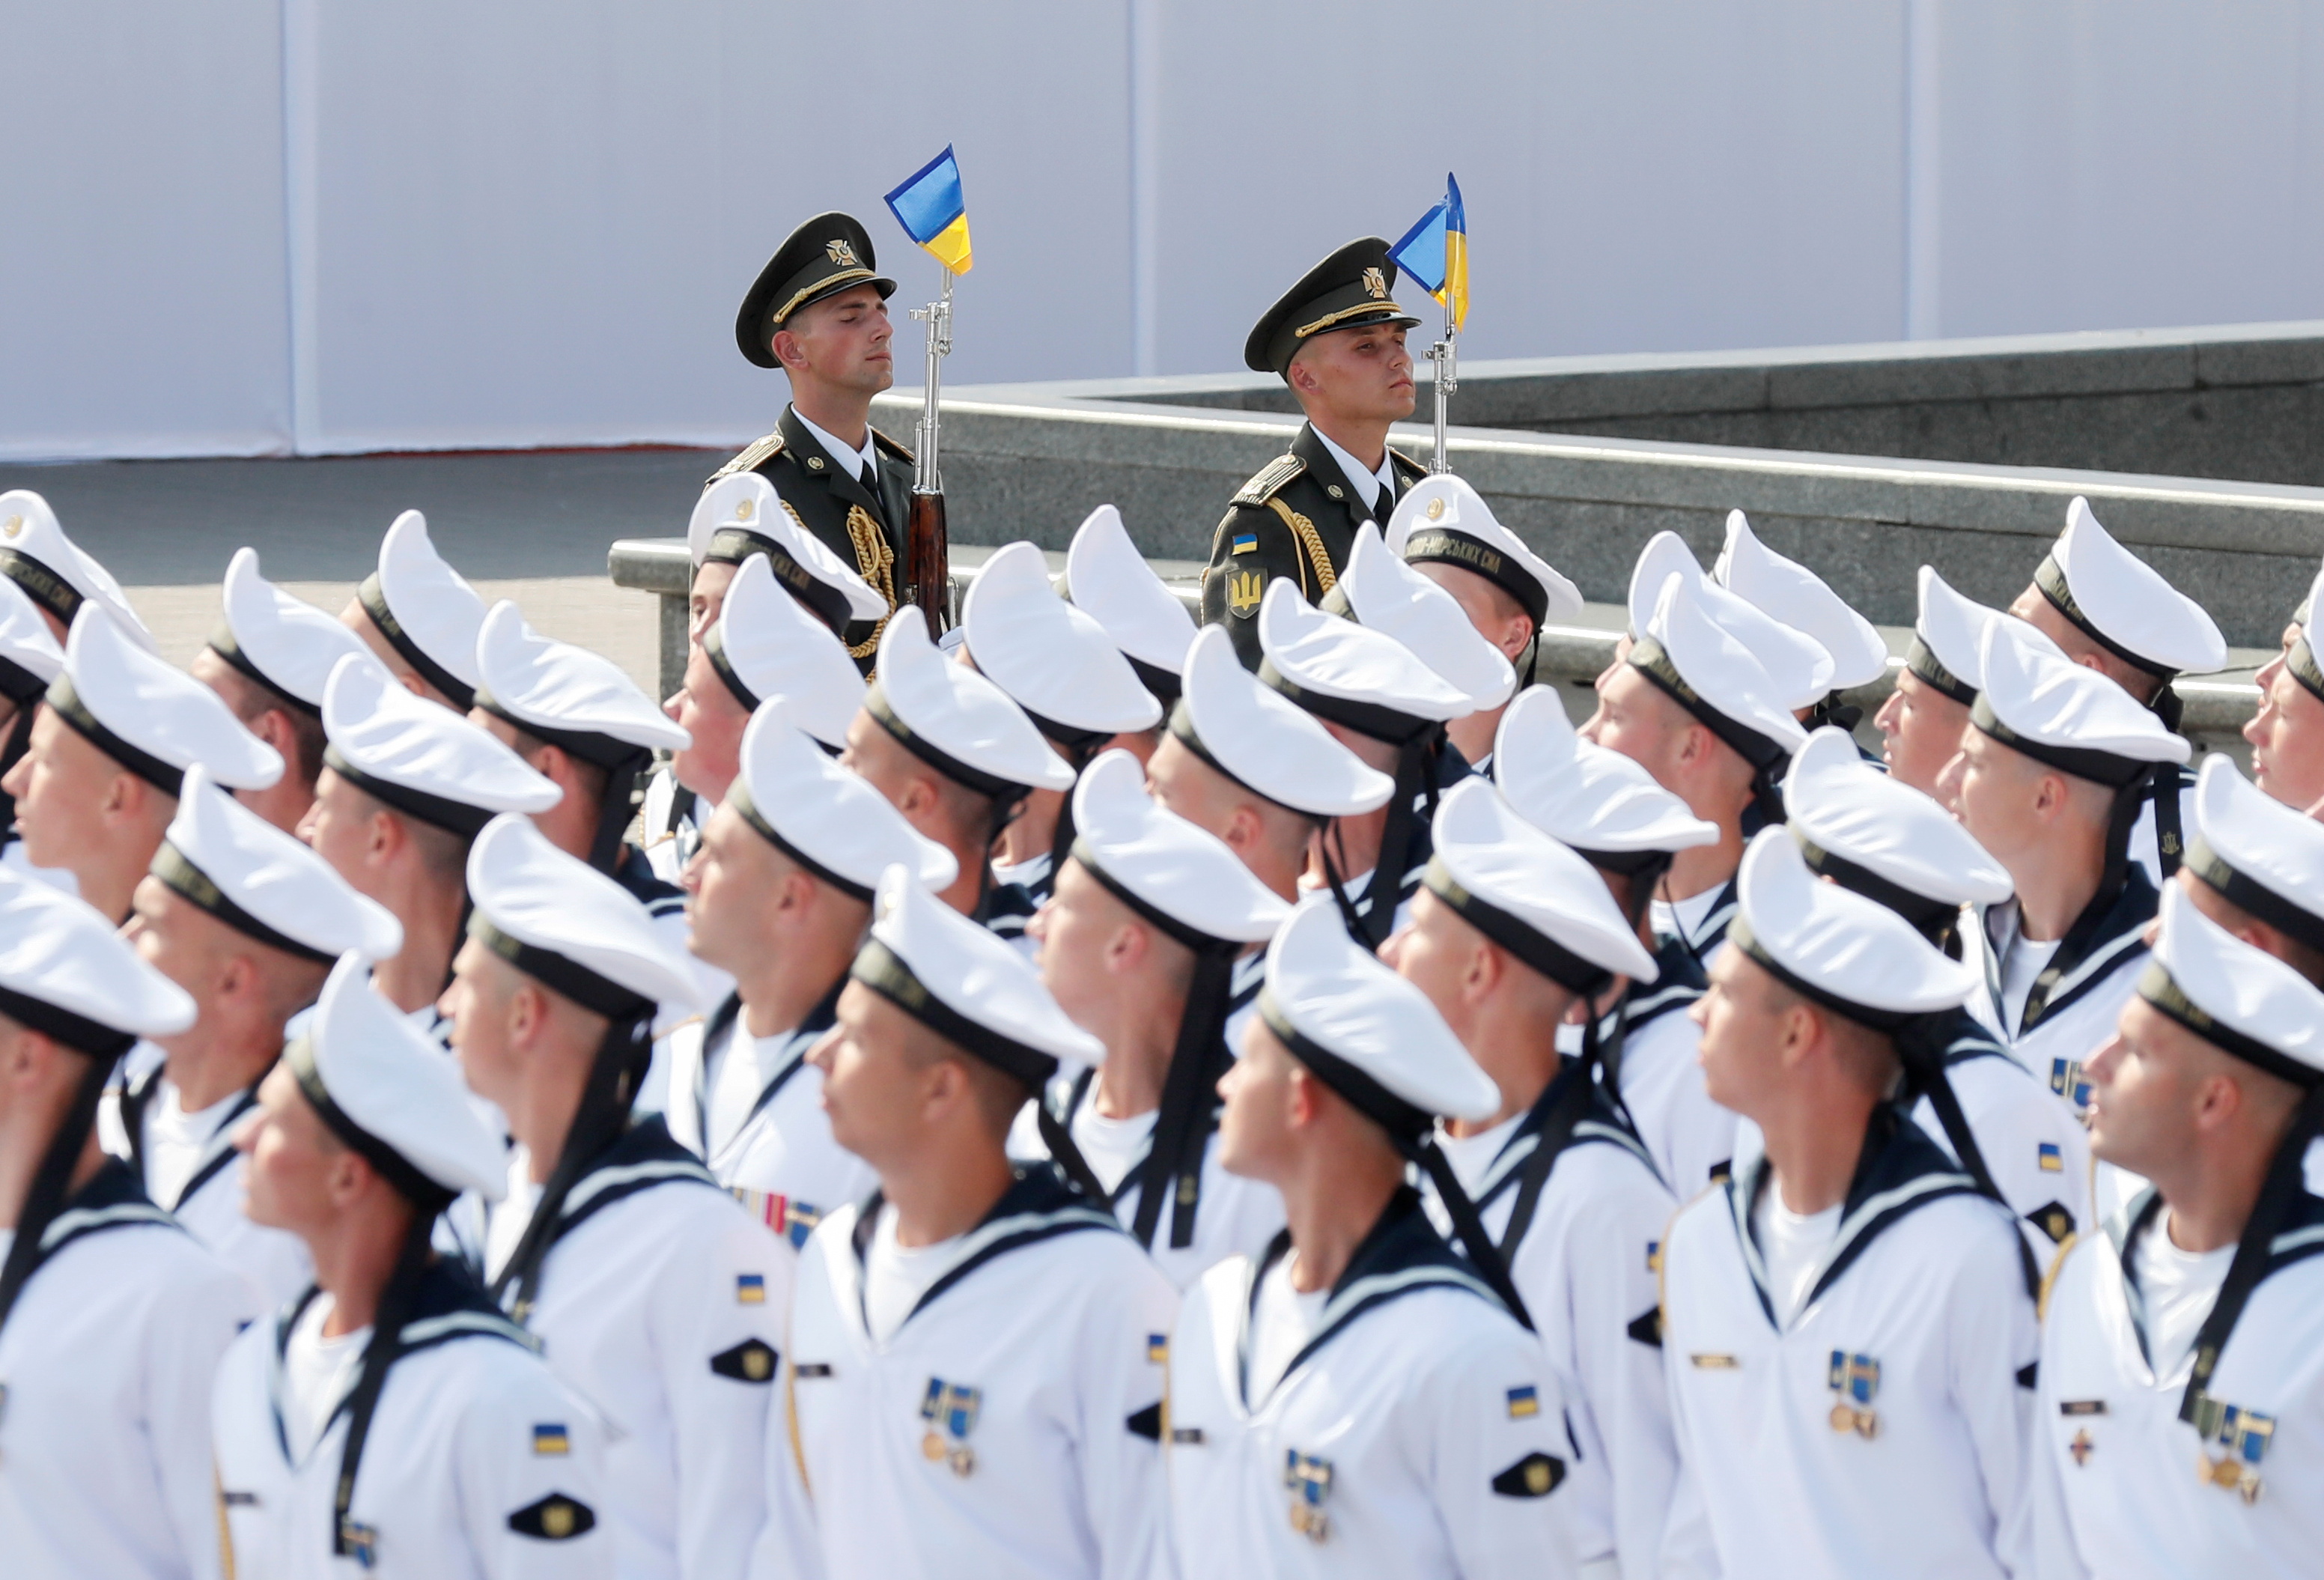 Ukrainian service members take part in the Independence Day military parade in Kyiv